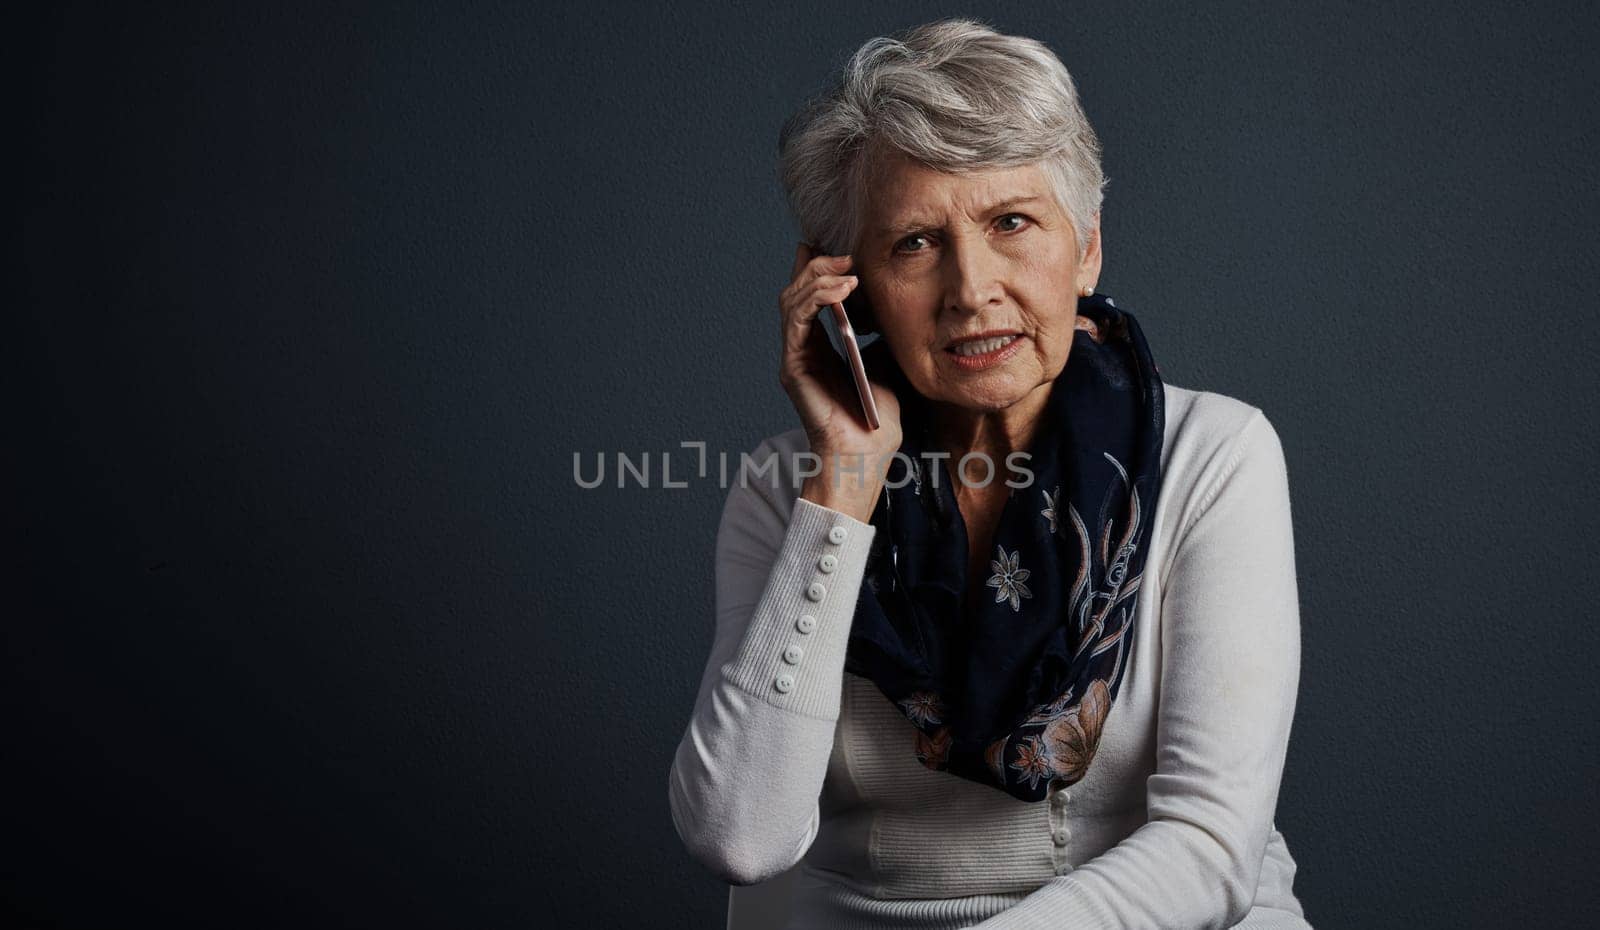 Youre asking for a food recipe. Studio shot of an elderly woman sitting down and talking on her cellphone